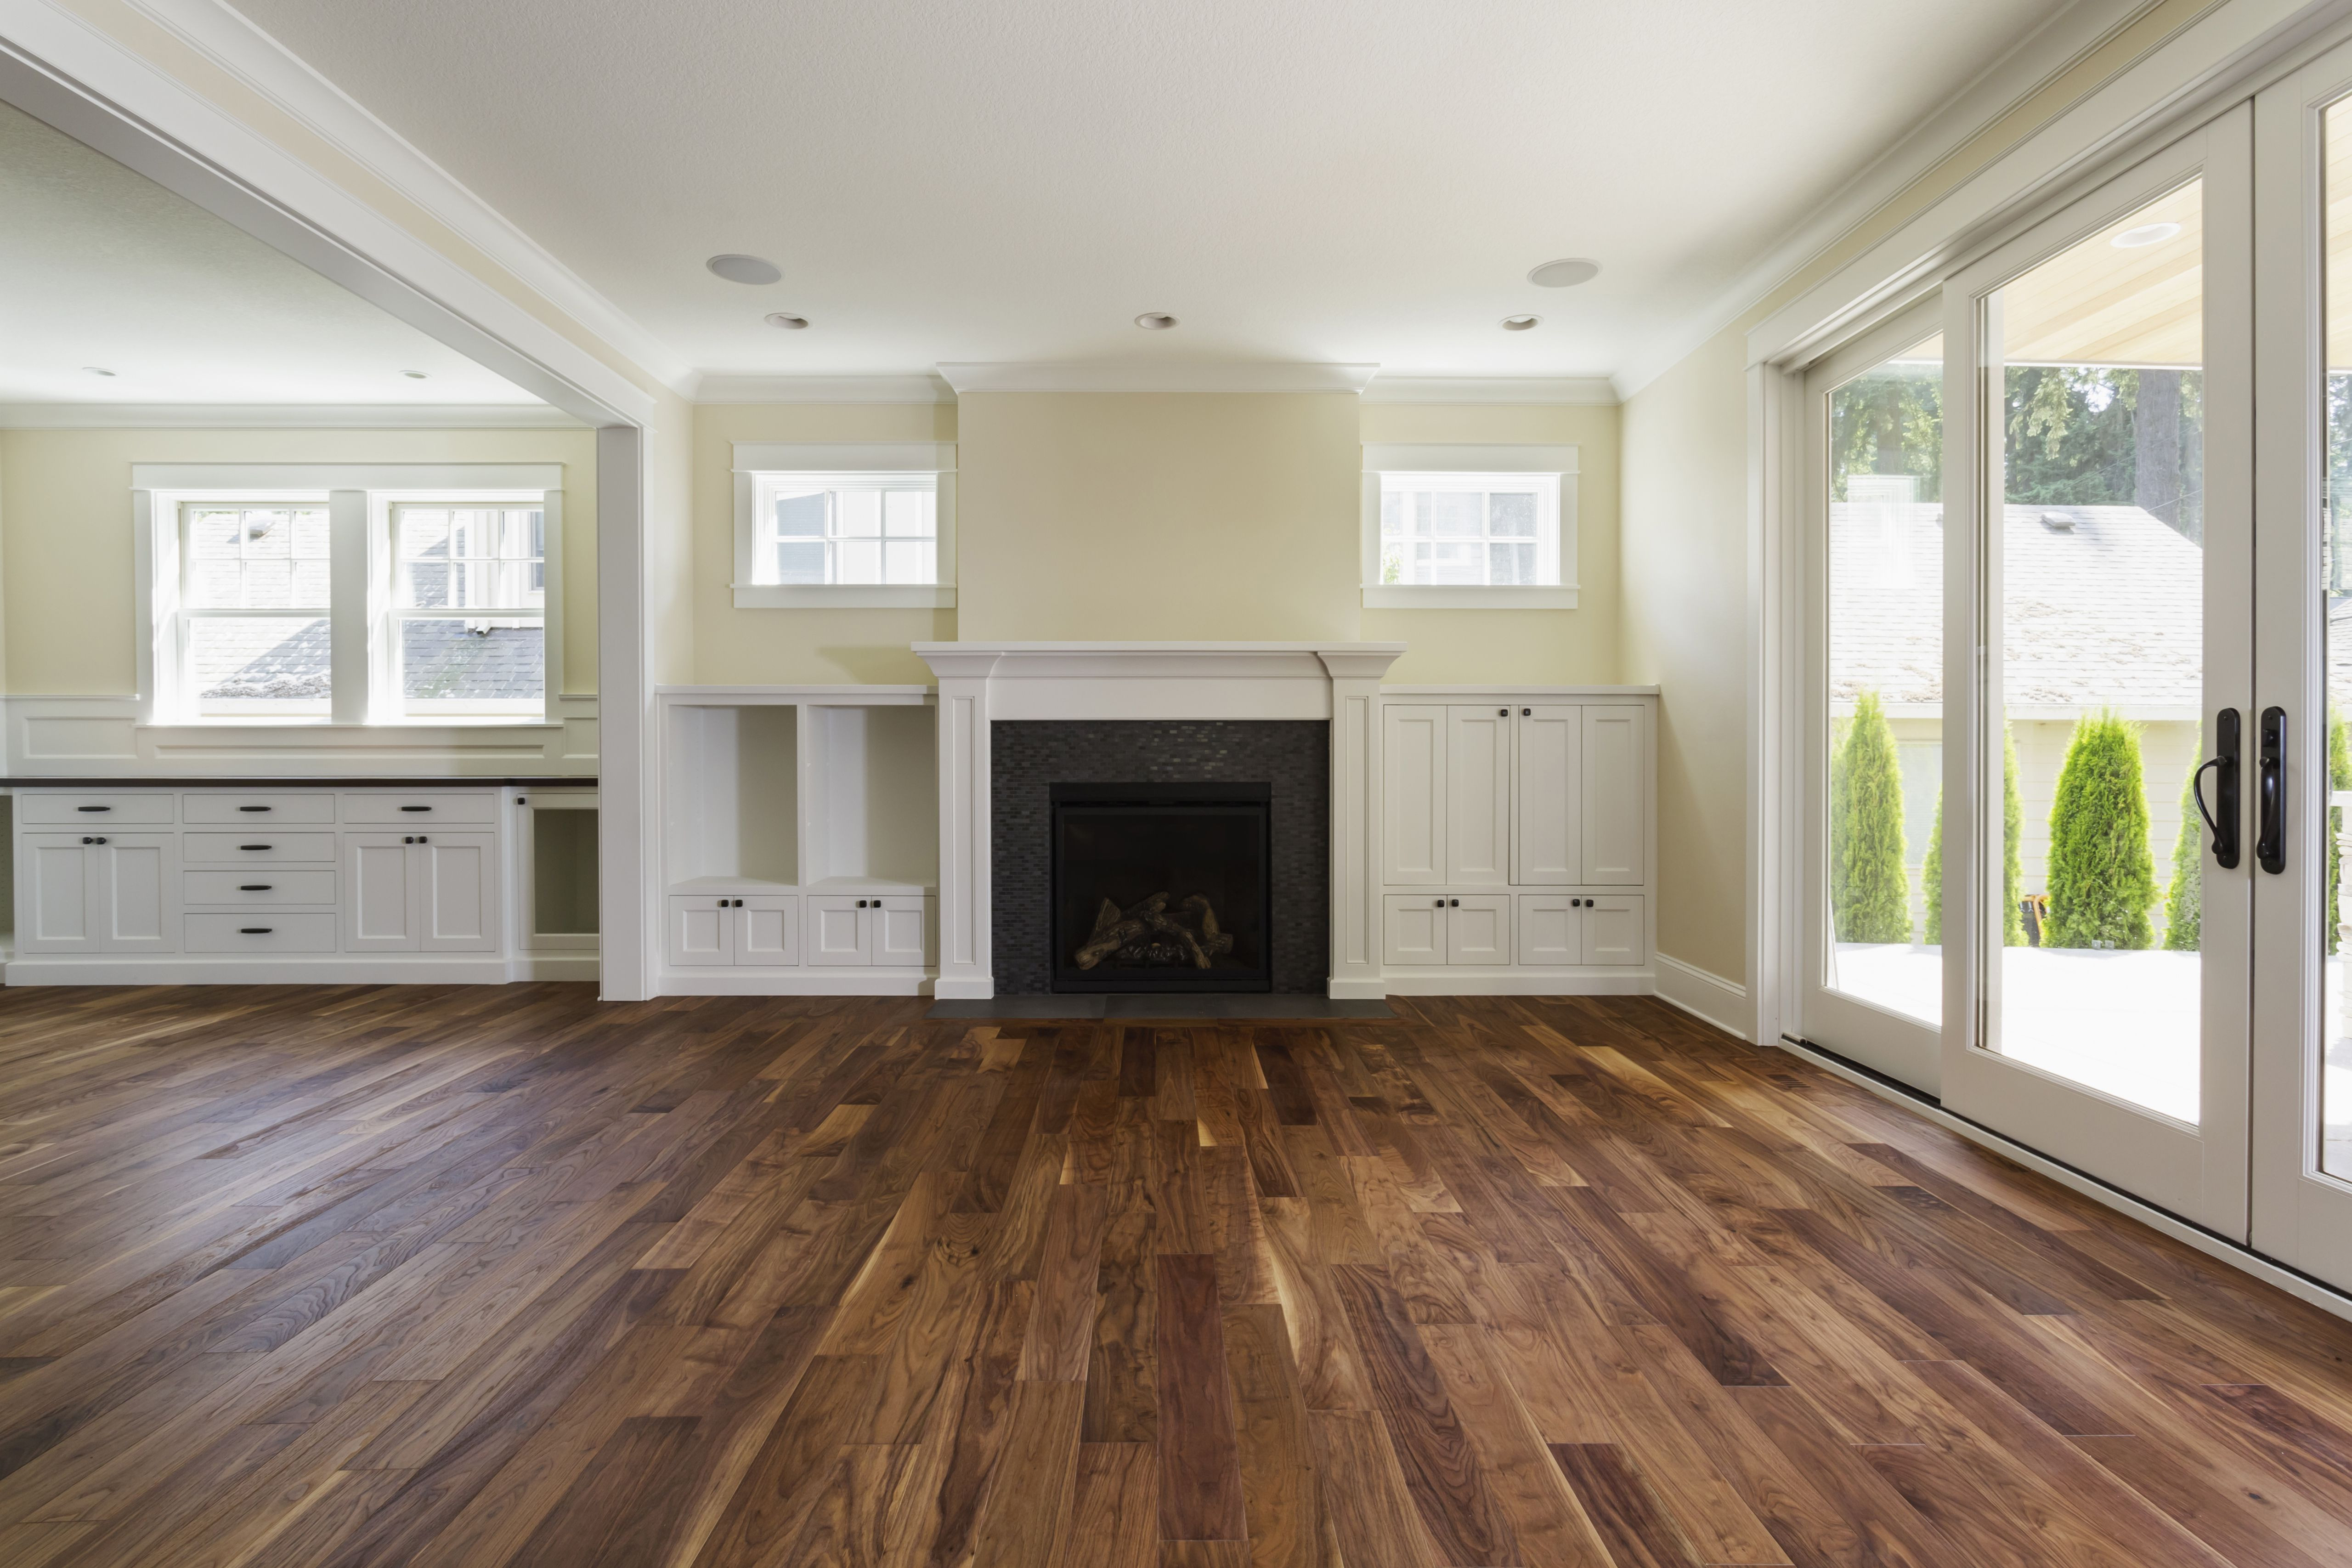 Best Hardwood Floor Options Of The Pros And Cons Of Prefinished Hardwood Flooring Pertaining To Fireplace And Built In Shelves In Living Room 482143011 57bef8e33df78cc16e035397 